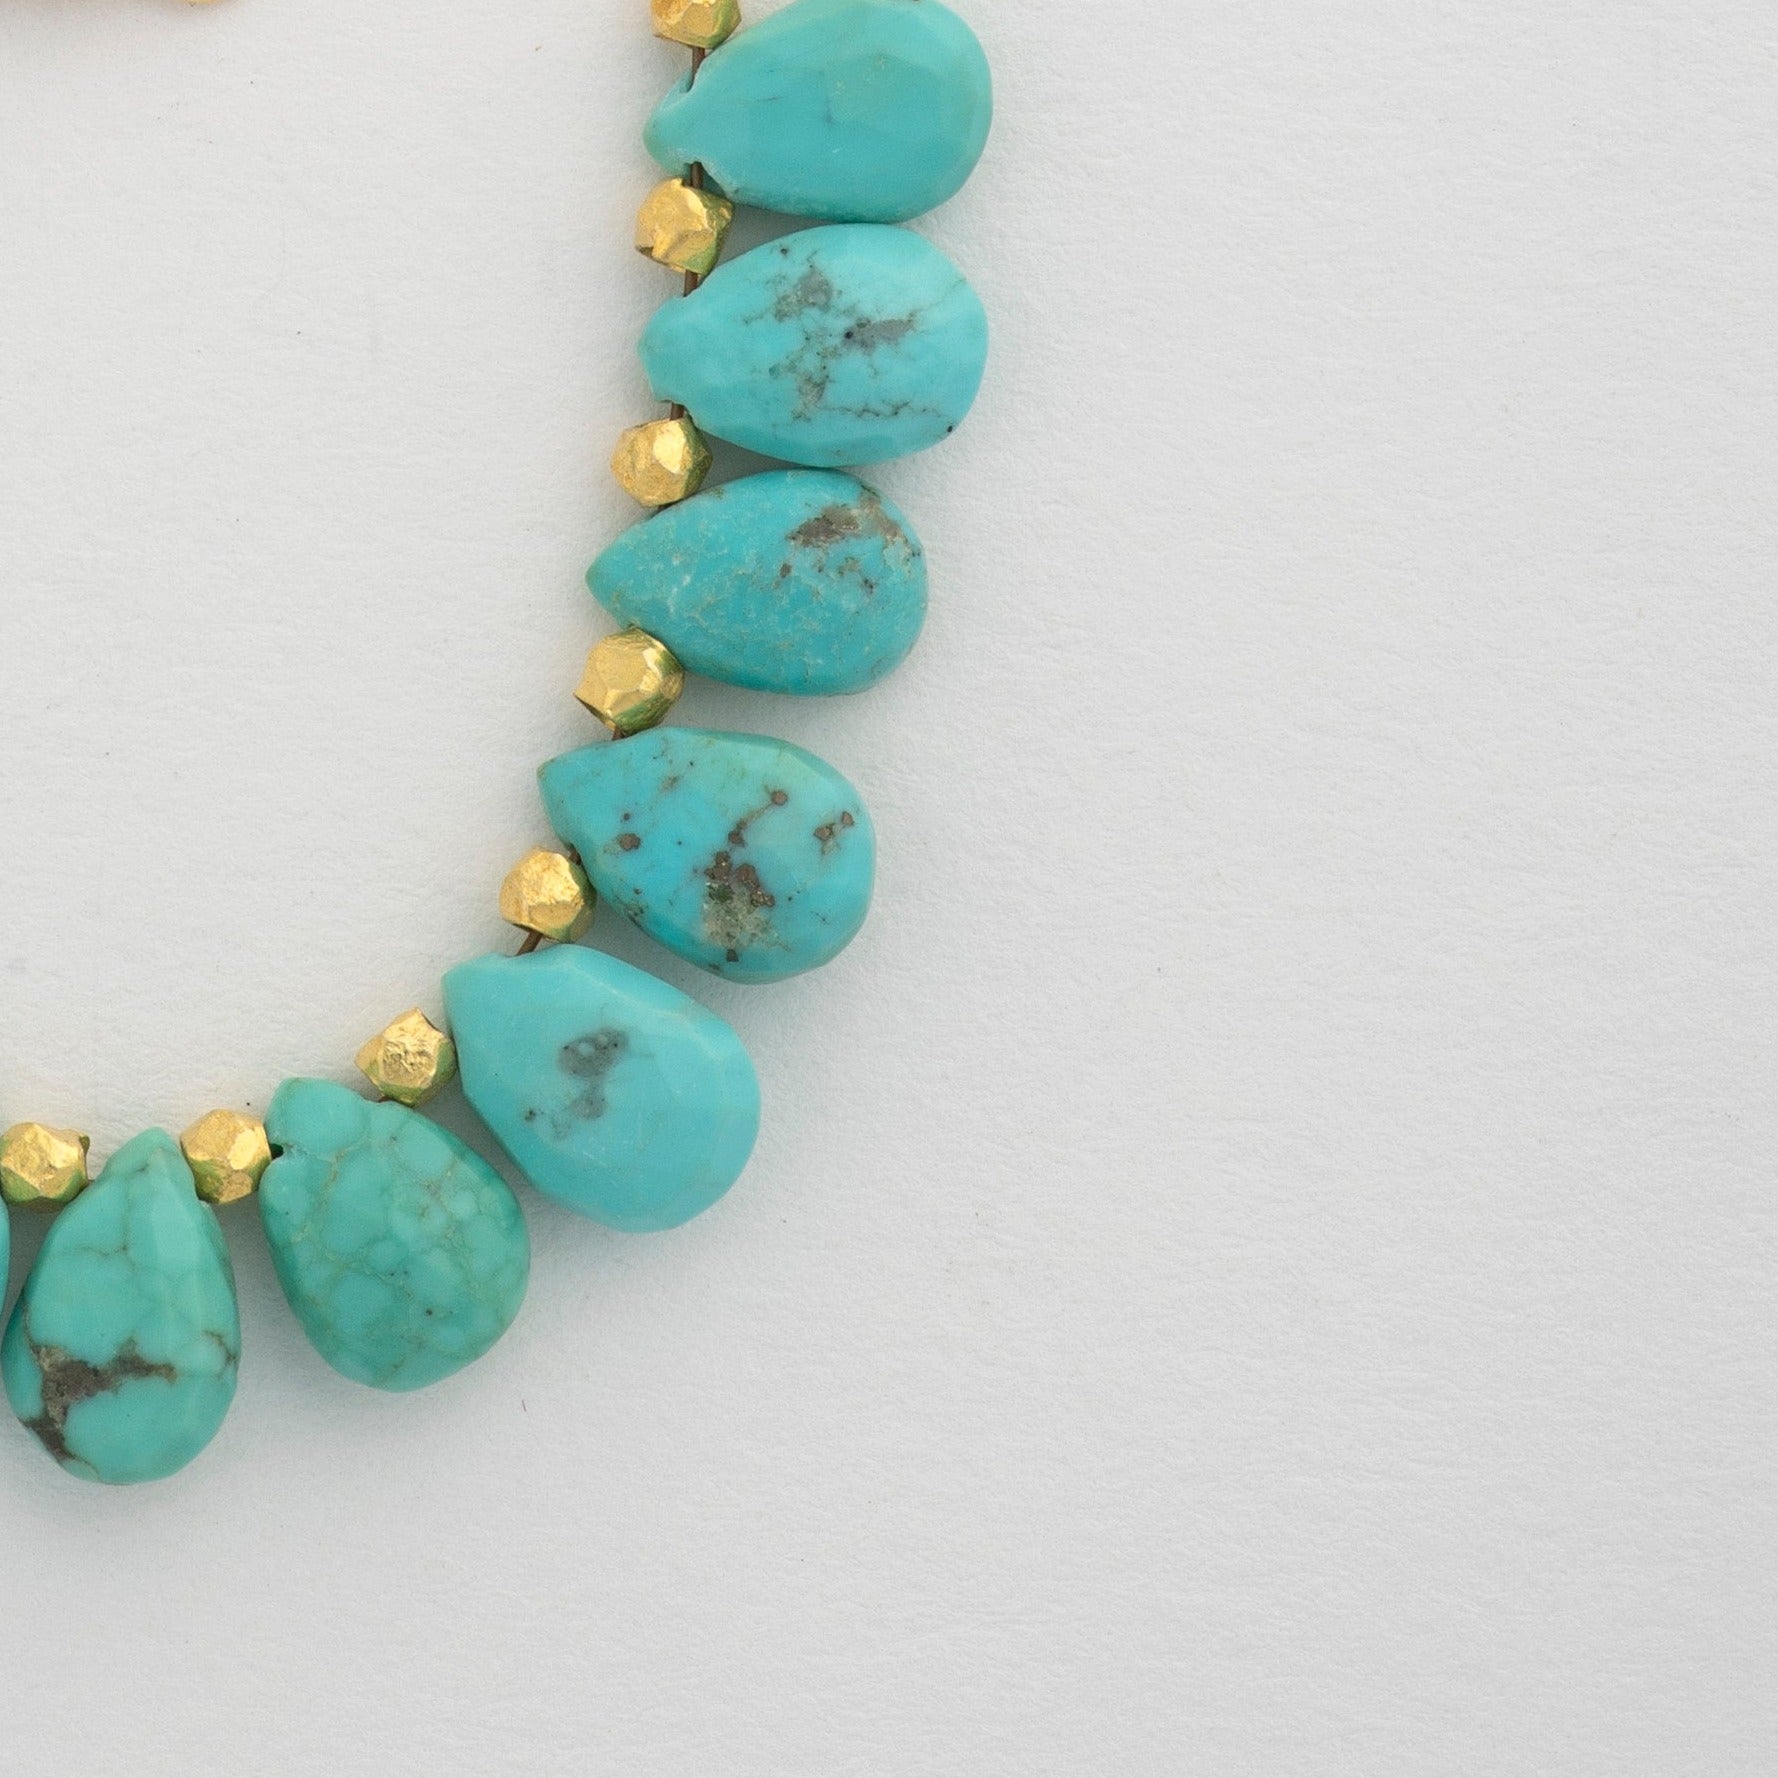 Turquoise Teardrops Necklace